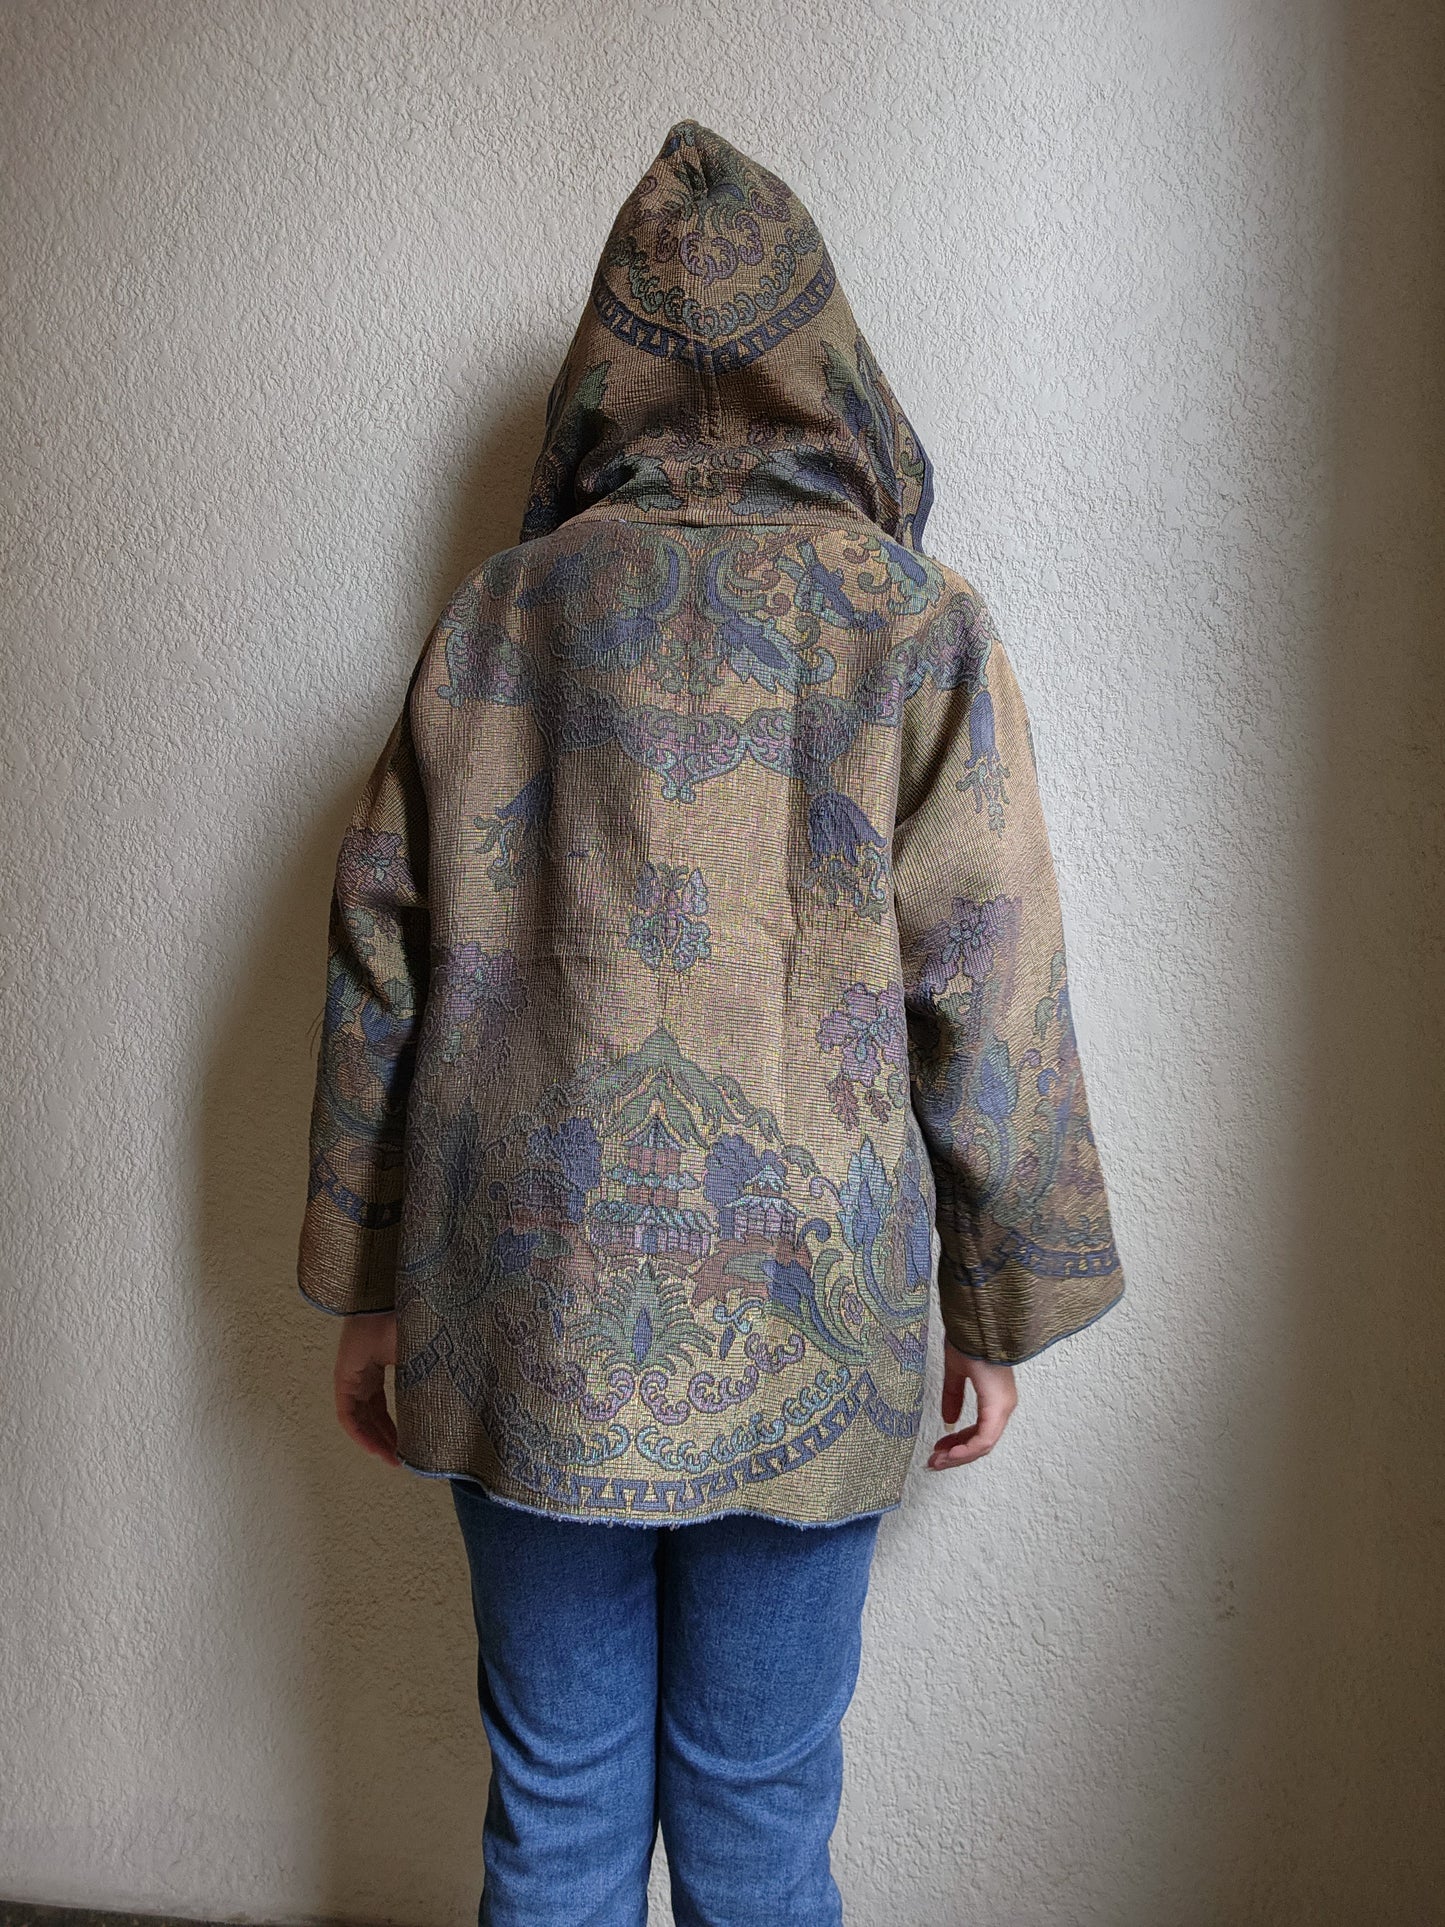 Throw-Over Hooded Jacket